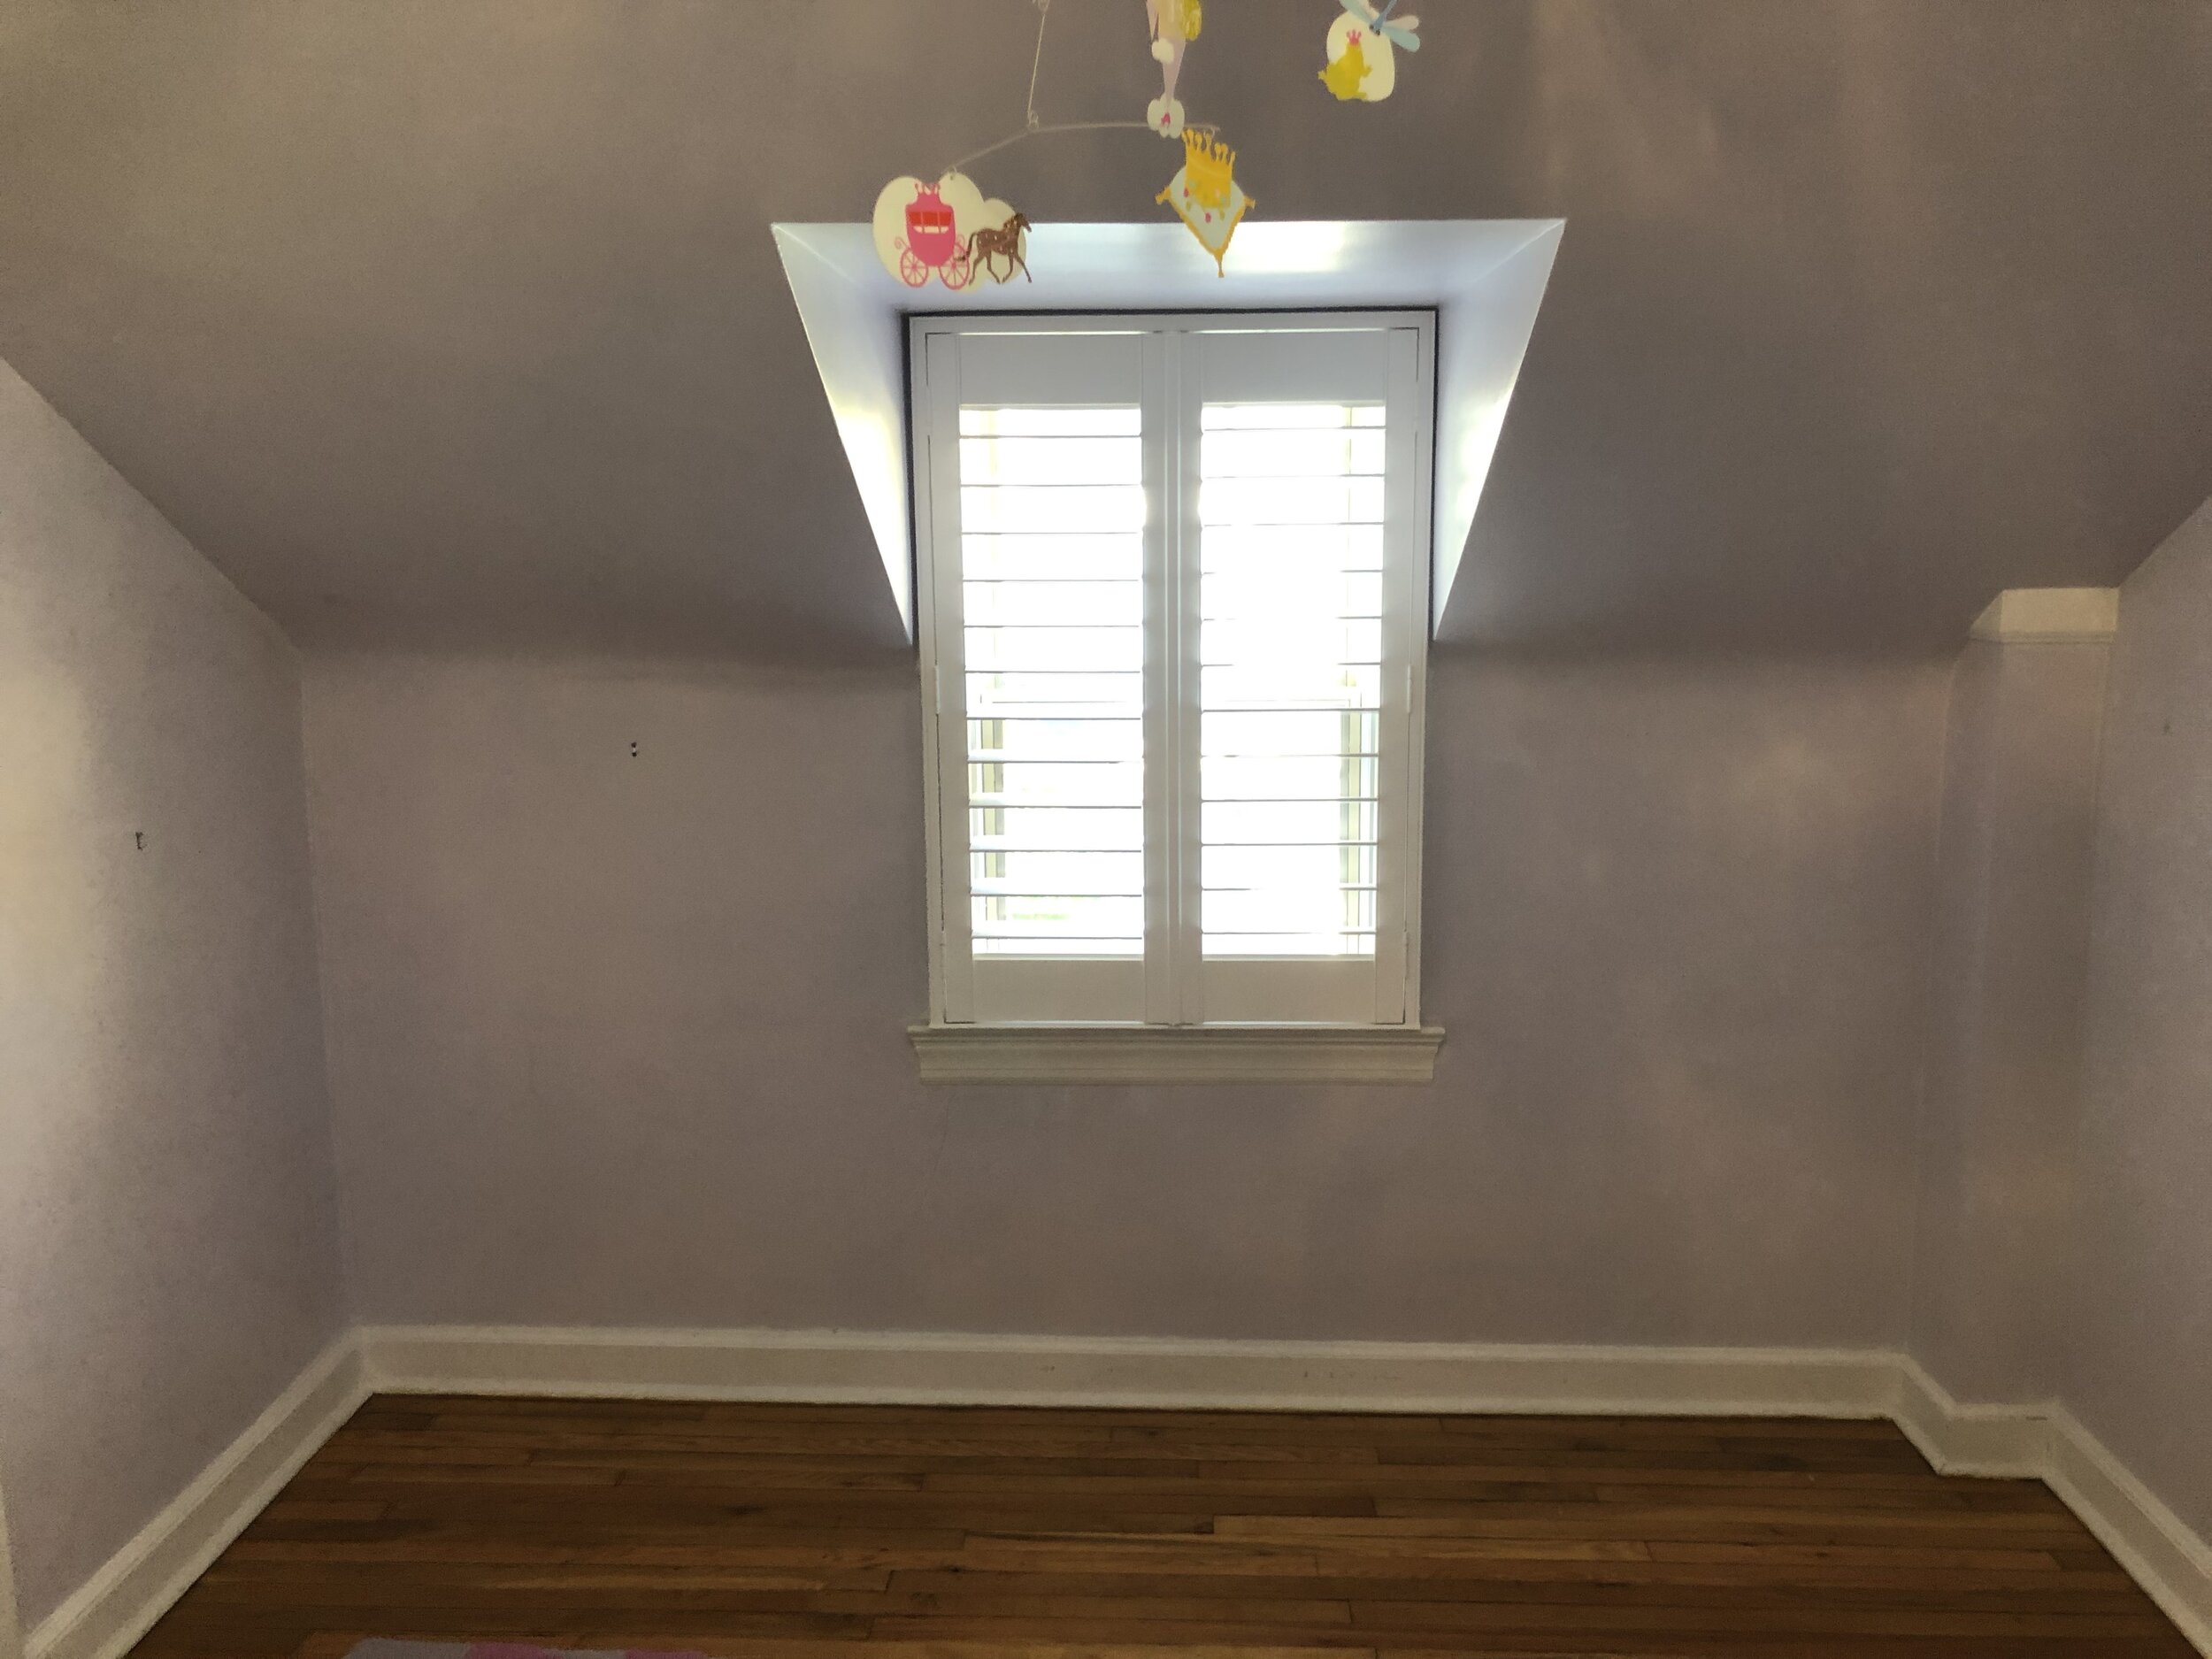  A client contacted me to create a built-in window seat and a pair of storage cabinets for this unique space in their daughter’s room. This was the space before I started. 